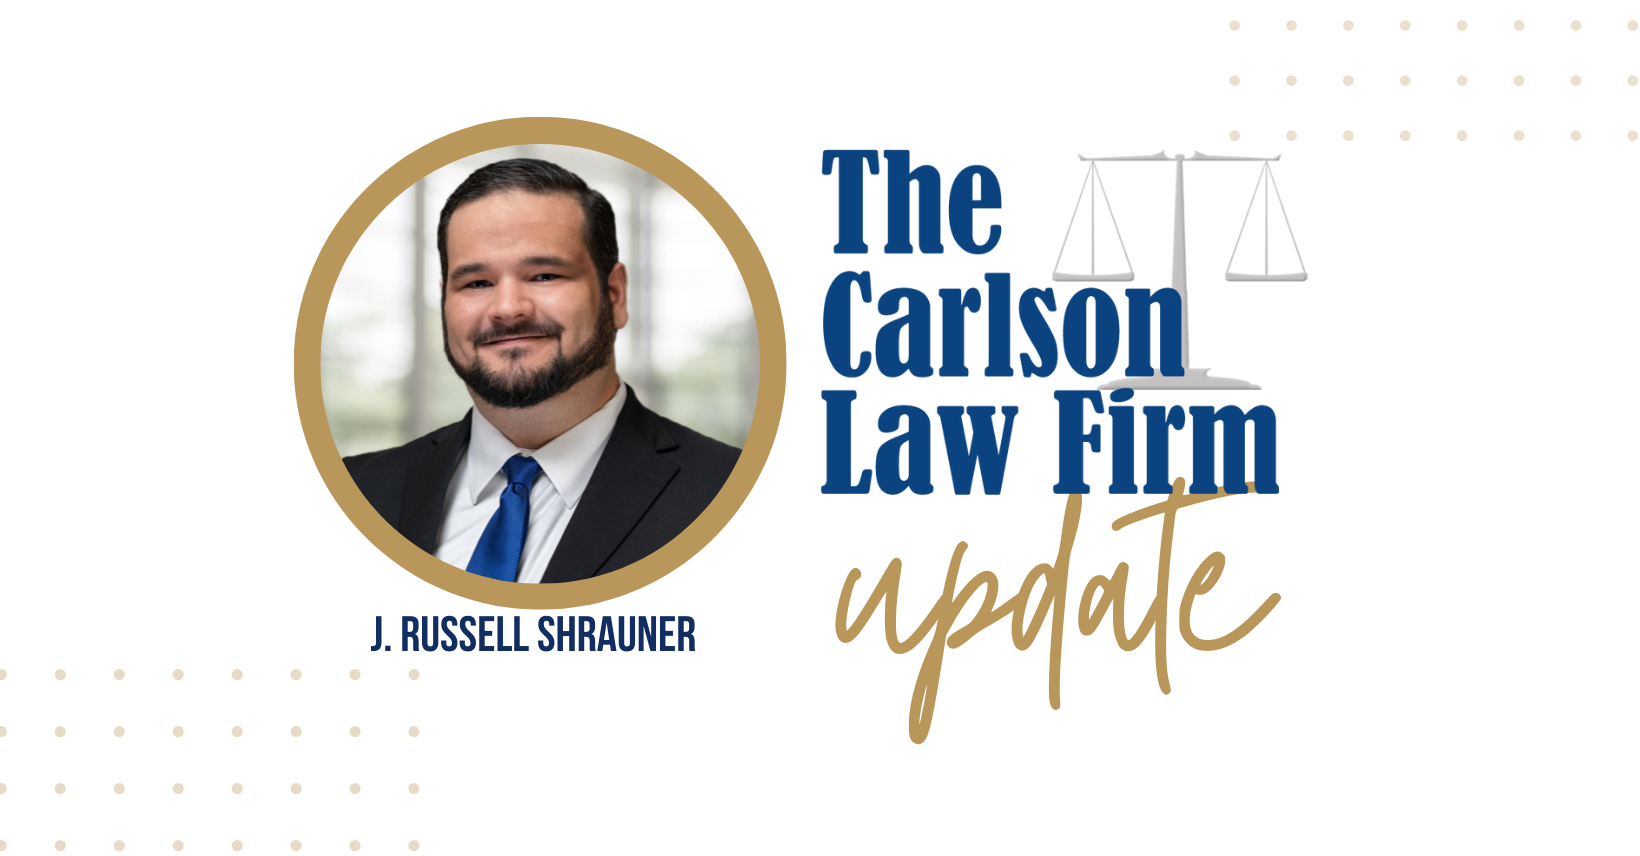 The Carlson Law Firm's J. Russell Shrauner Was Appointed To The Board Of Directors For The Texas Young Lawyers Assciation.